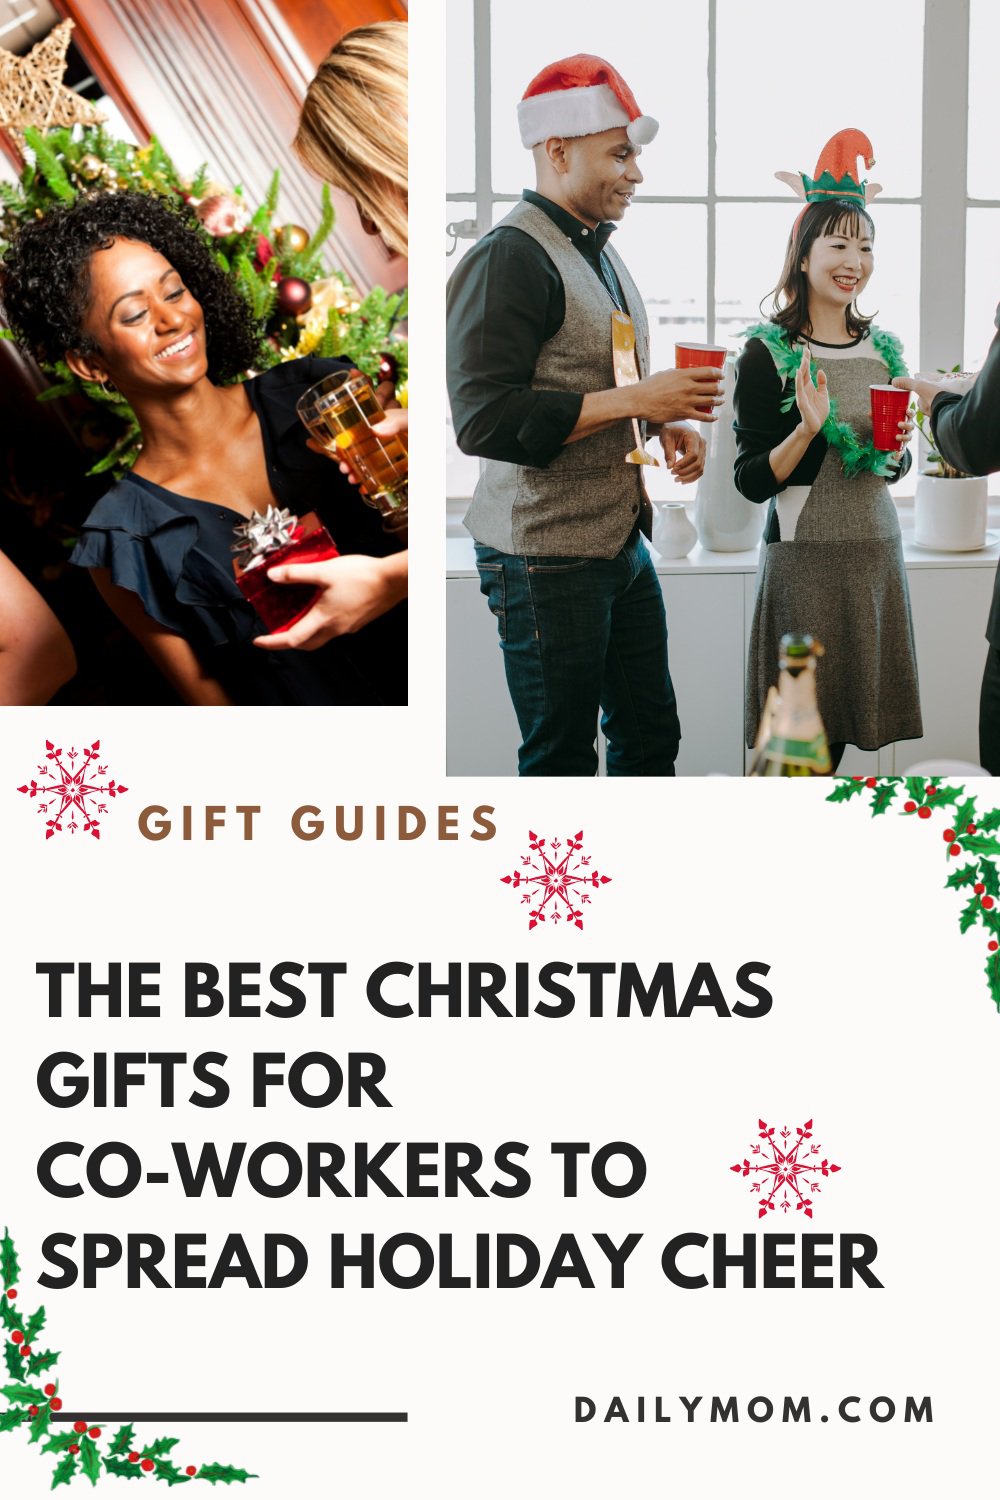 19 Of The Best Christmas Gifts For Co-Workers To Spread Holiday Cheer